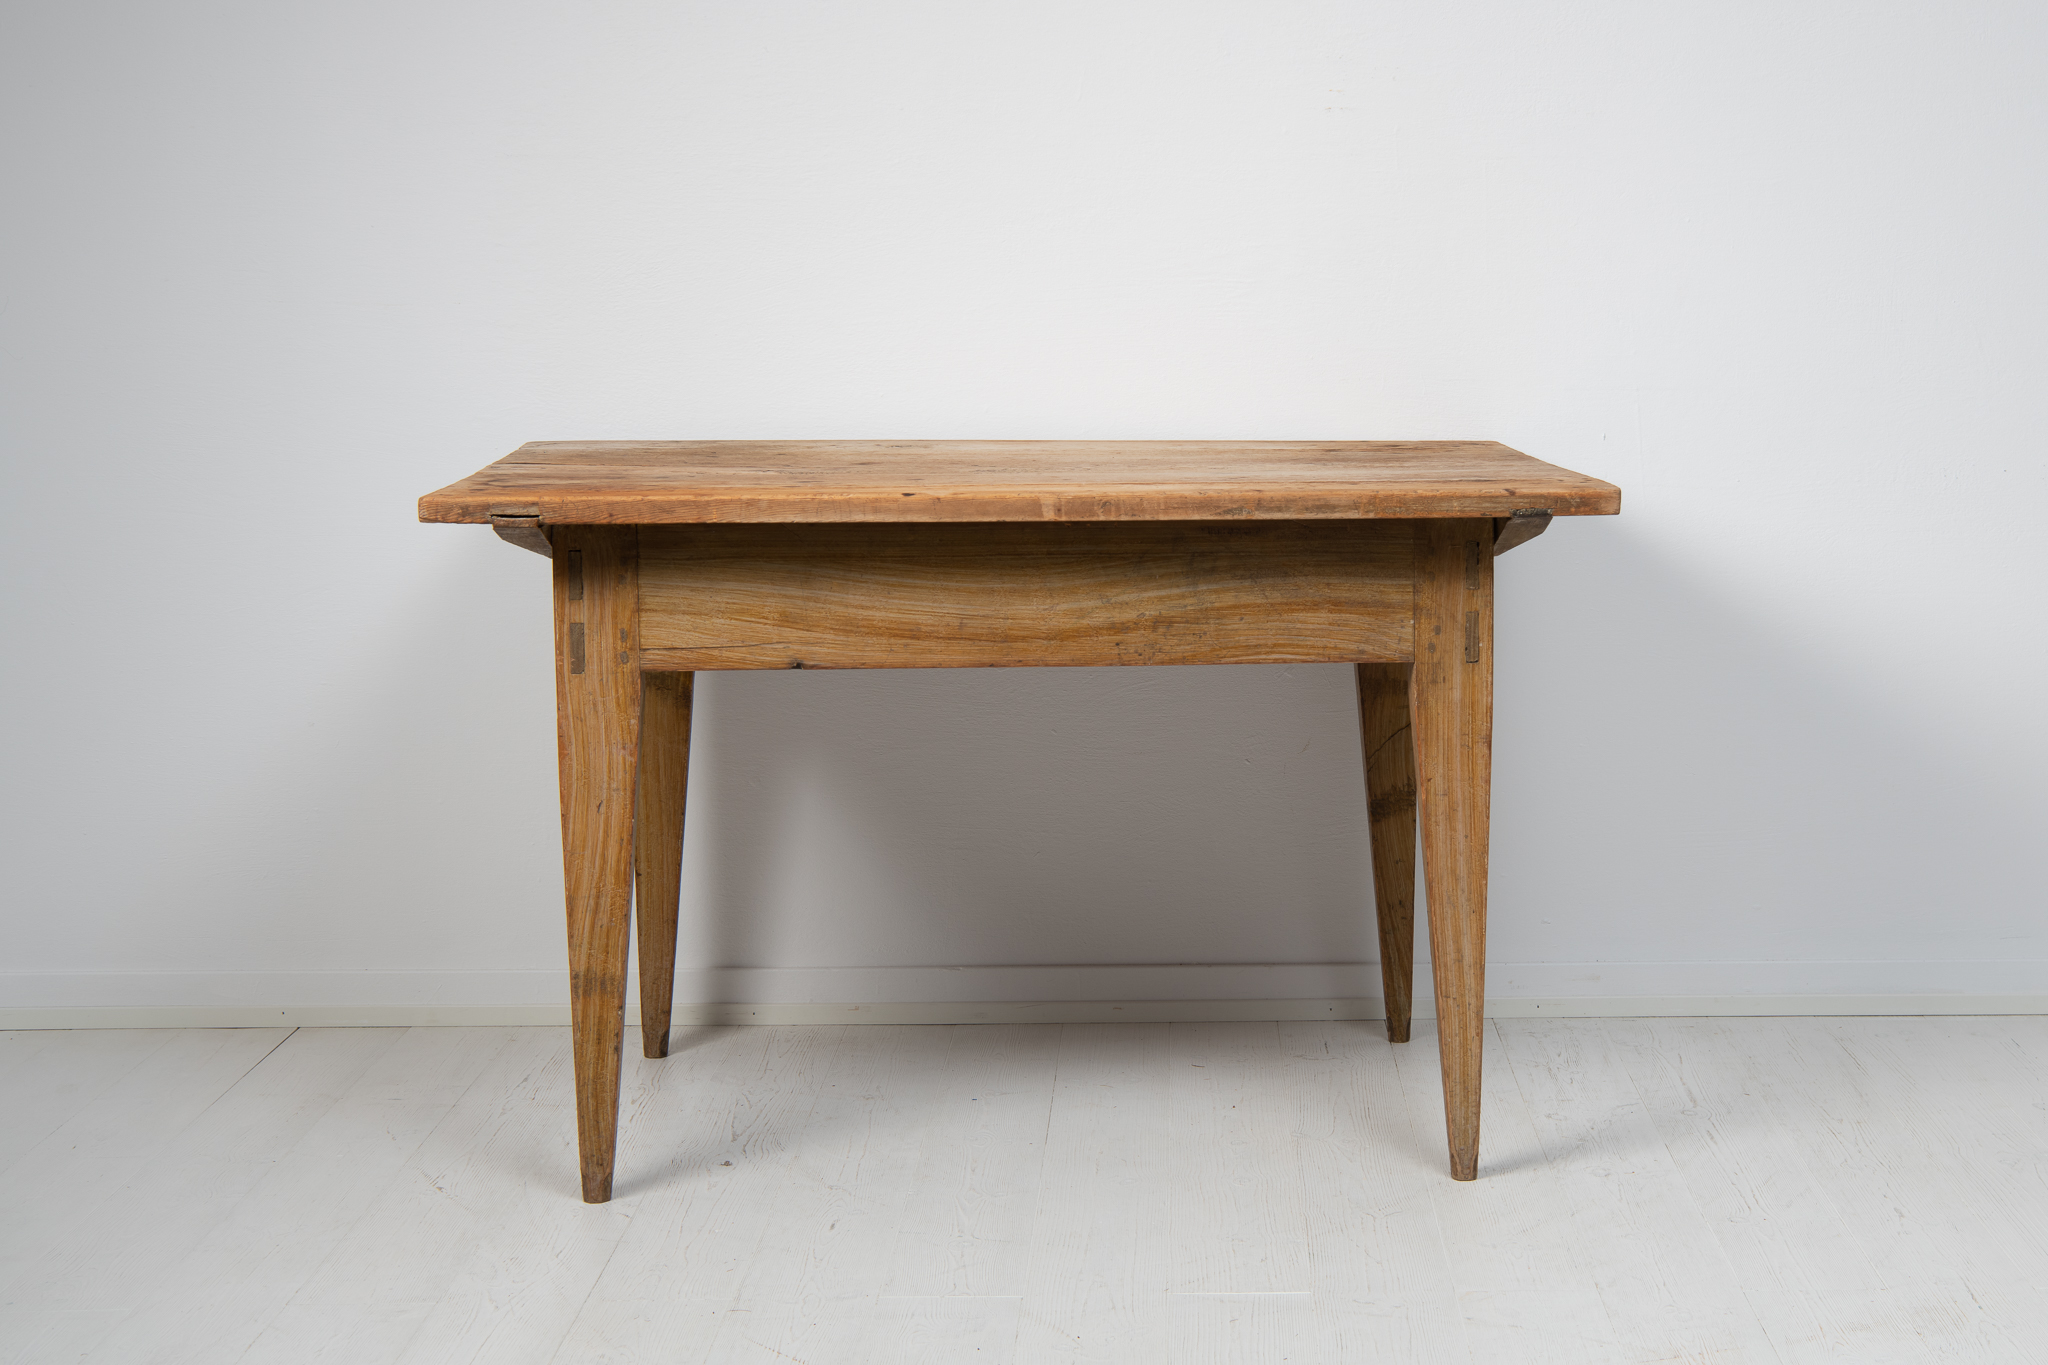 Swedish work or dining table in folk art from the early 19th century, around 1820. The table is genuine and honest with a solid frame and simple design